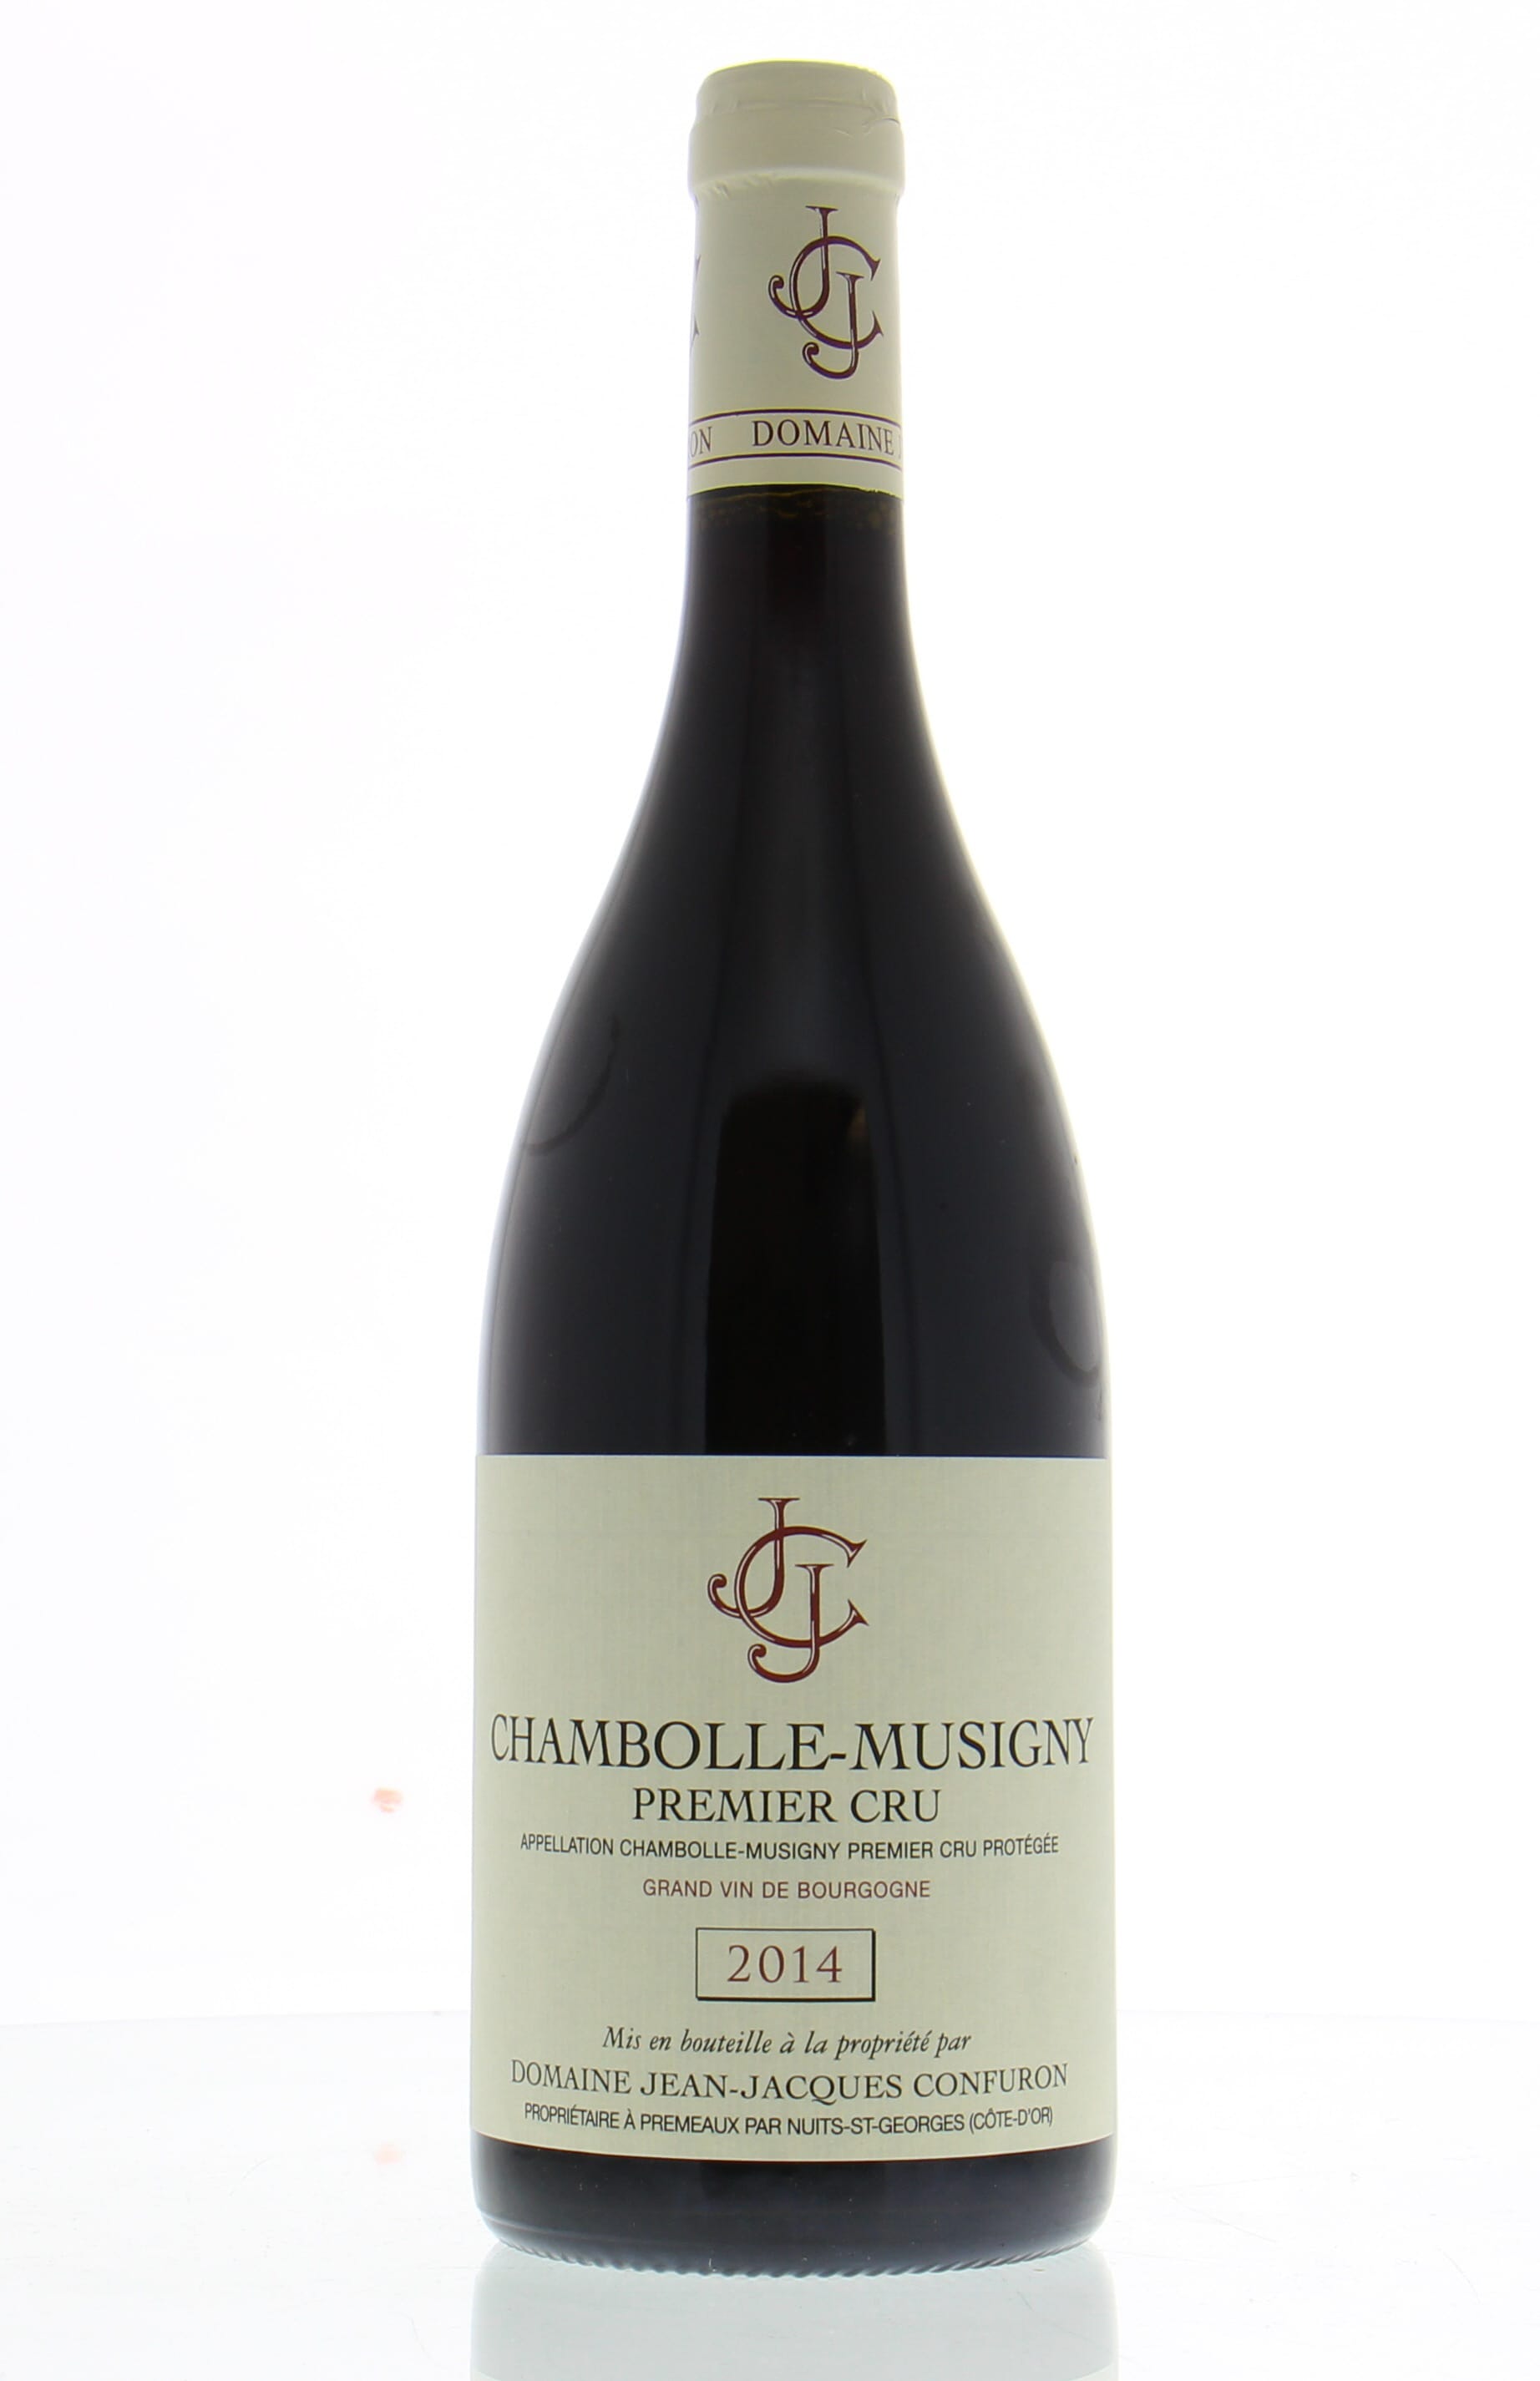 Jean-Jacques Confuron - Chambolle Musigny 1cru 2014 Perfect